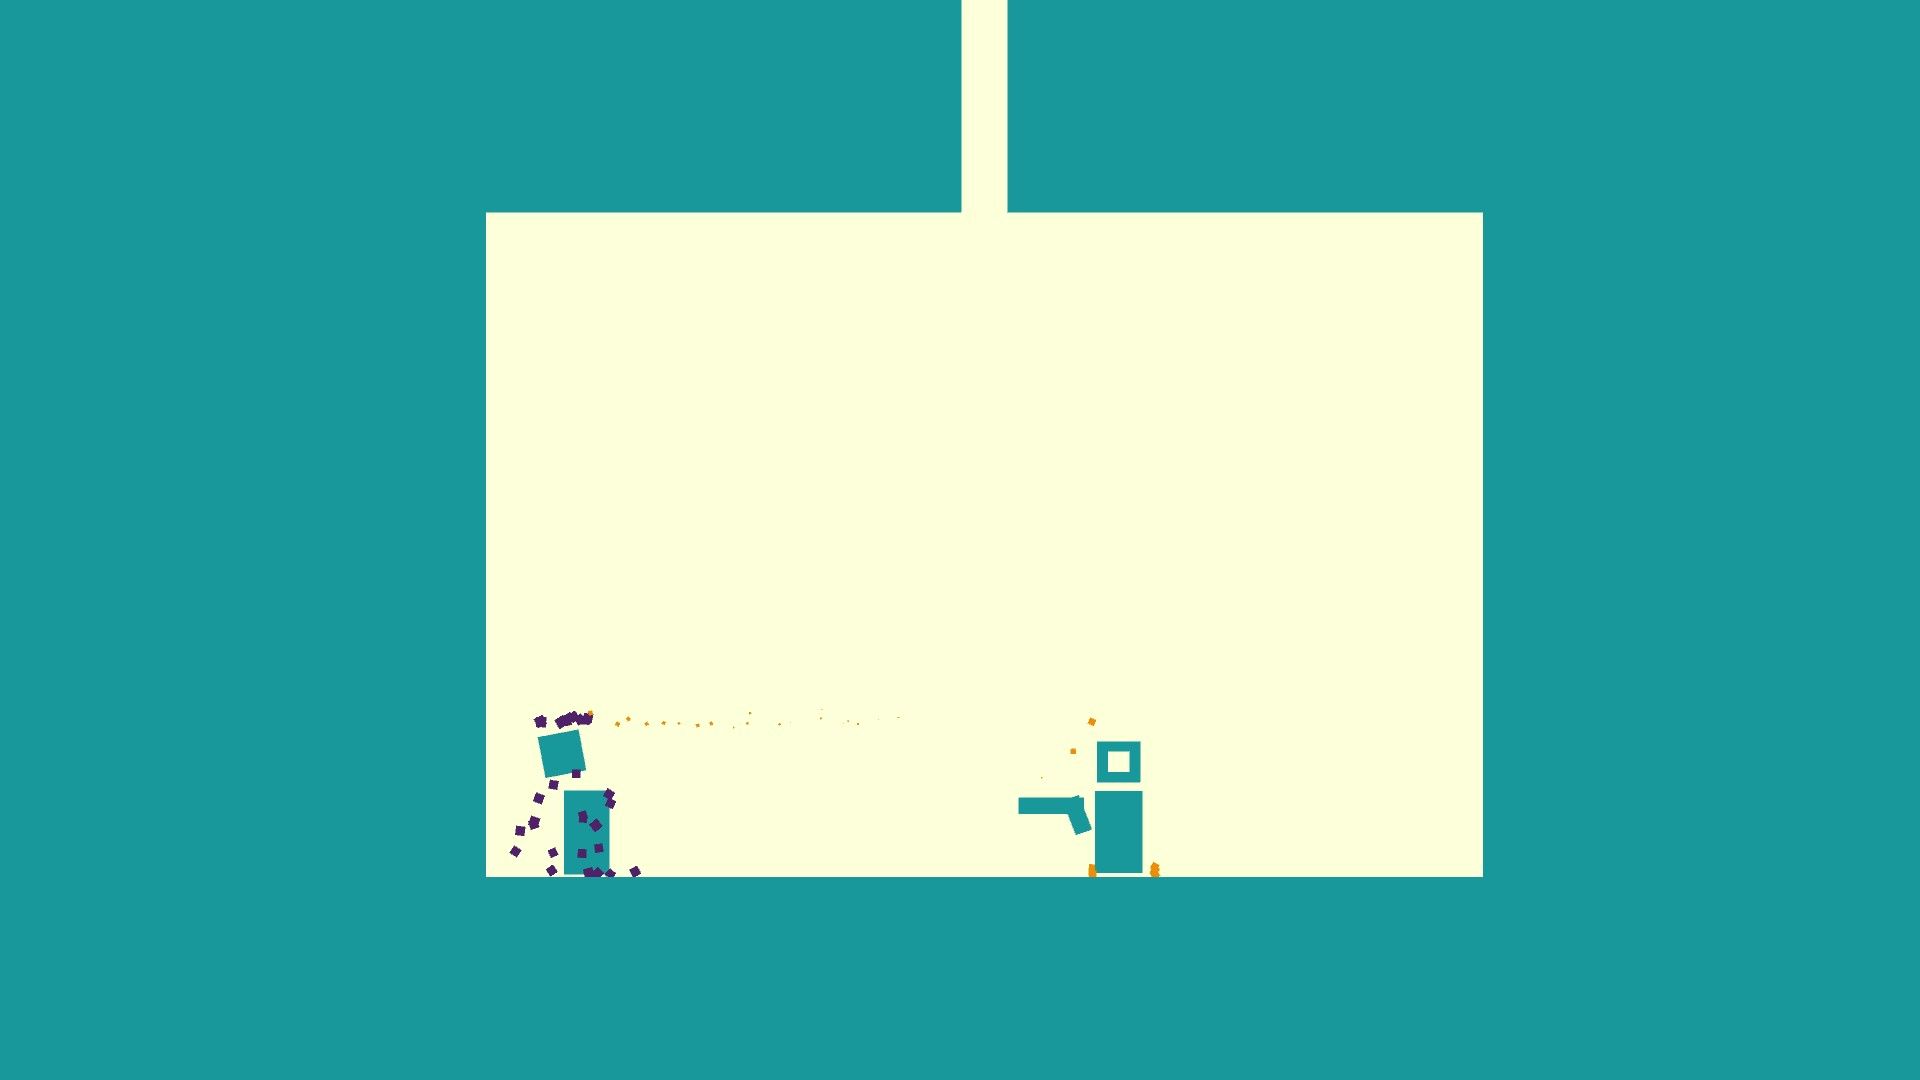 A minimal 2D character holding a gun, facing a decapitated opponent.